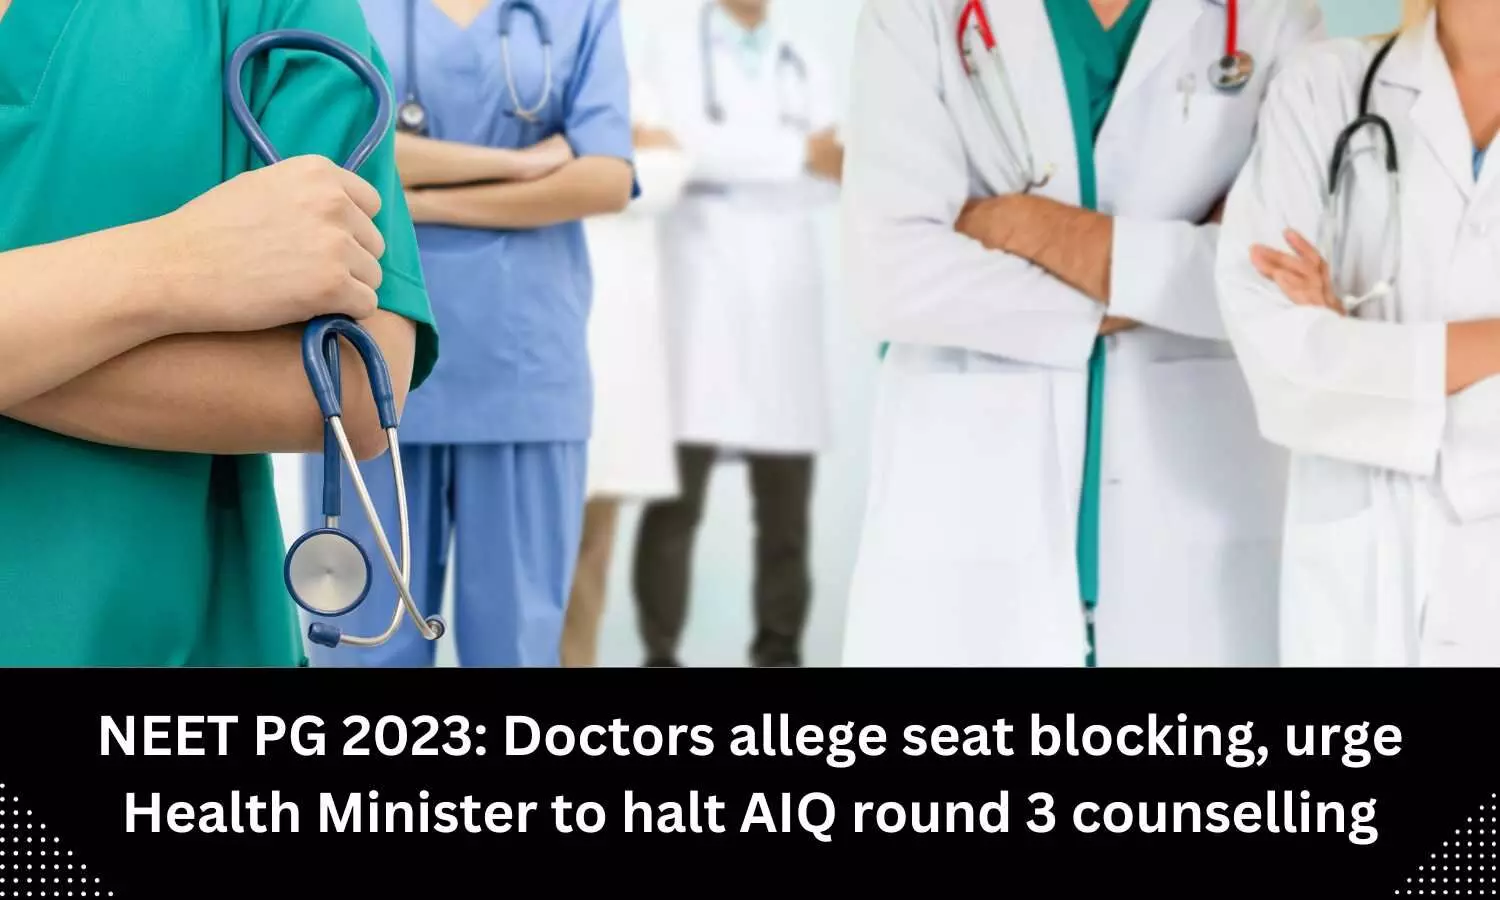 NEET PG 2023: Doctors allege seat blocking, urge Health Minister to halt AIQ round 3 counselling